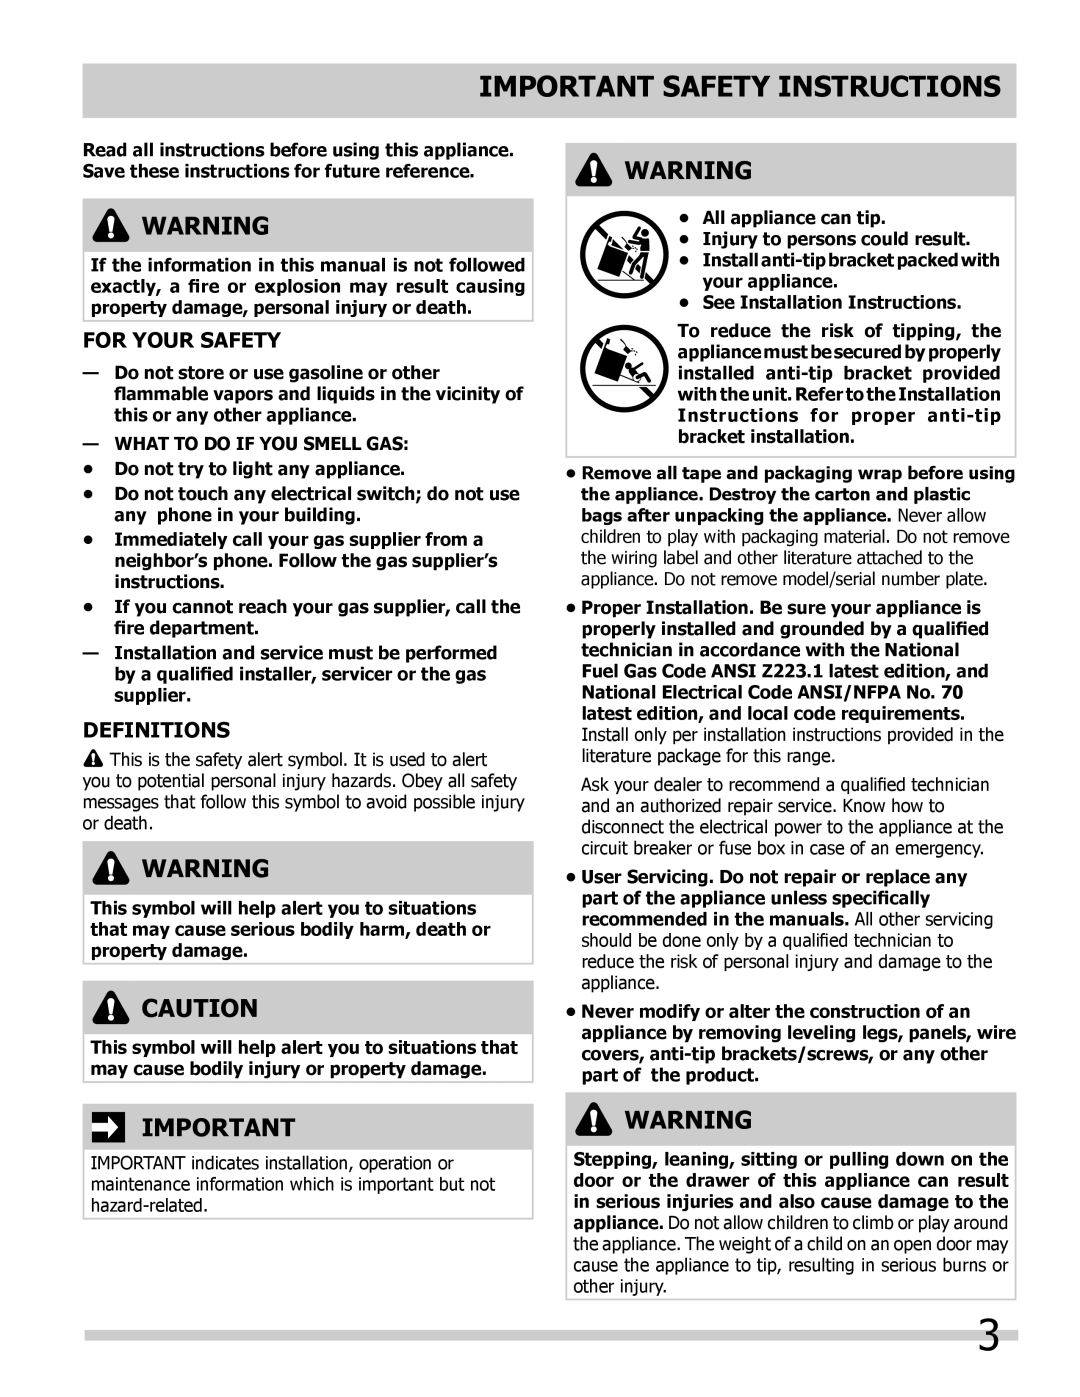 Frigidaire FGGS3045KB Important Safety Instructions, For Your Safety, Definitions, Do not store or use gasoline or other 